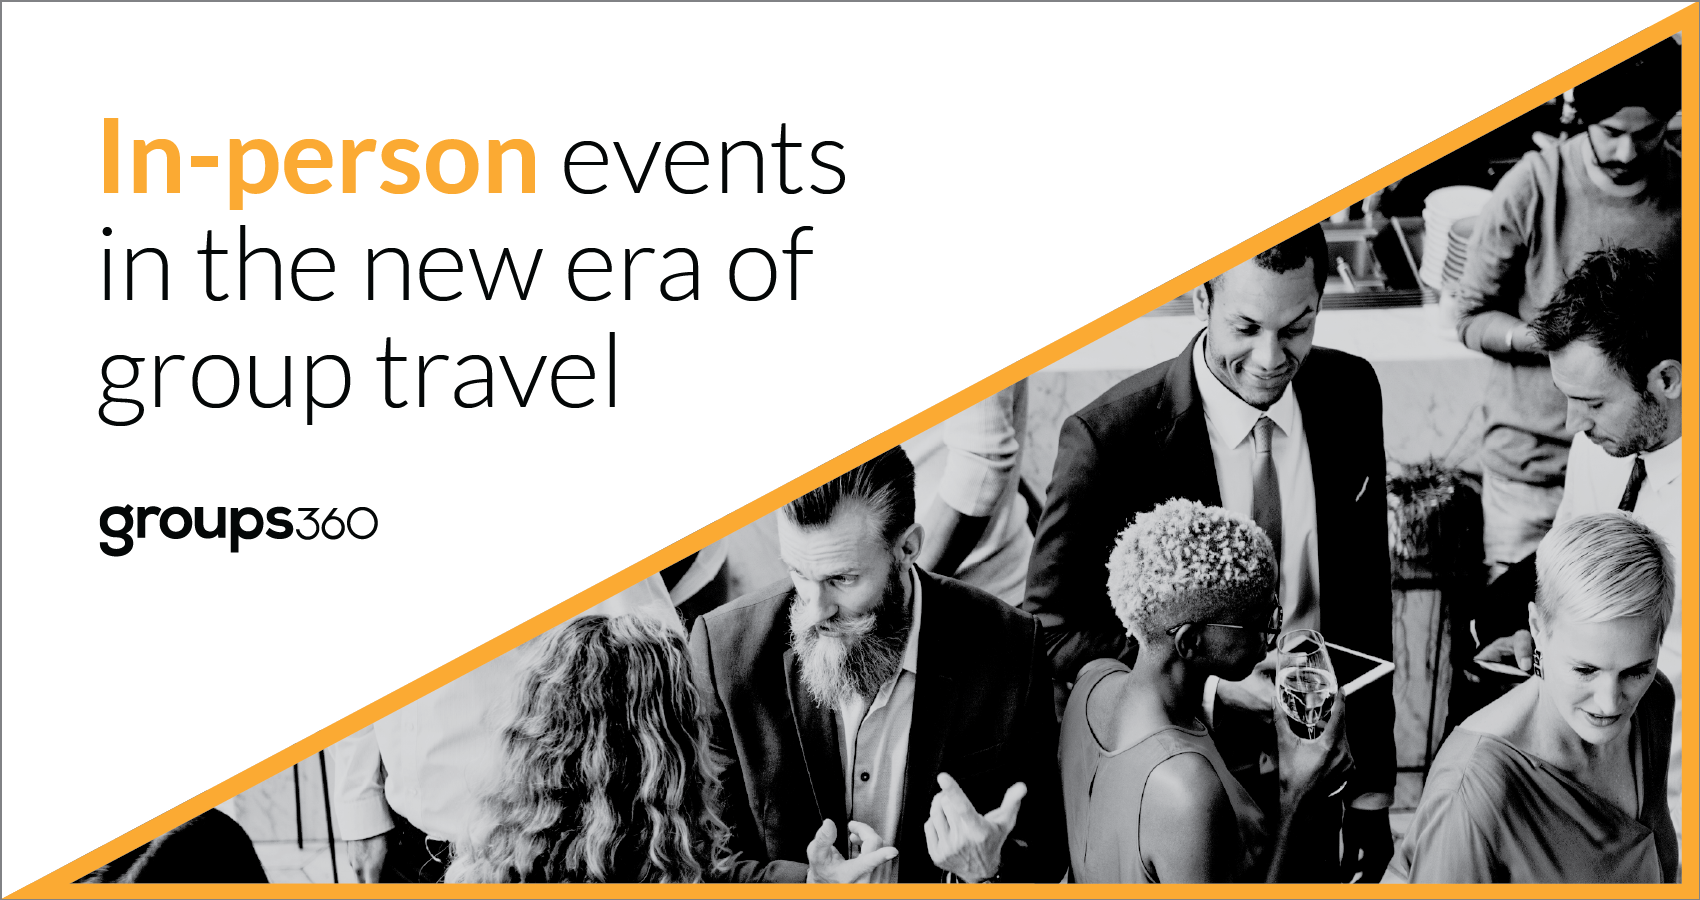 in-person events in the new era of group travel